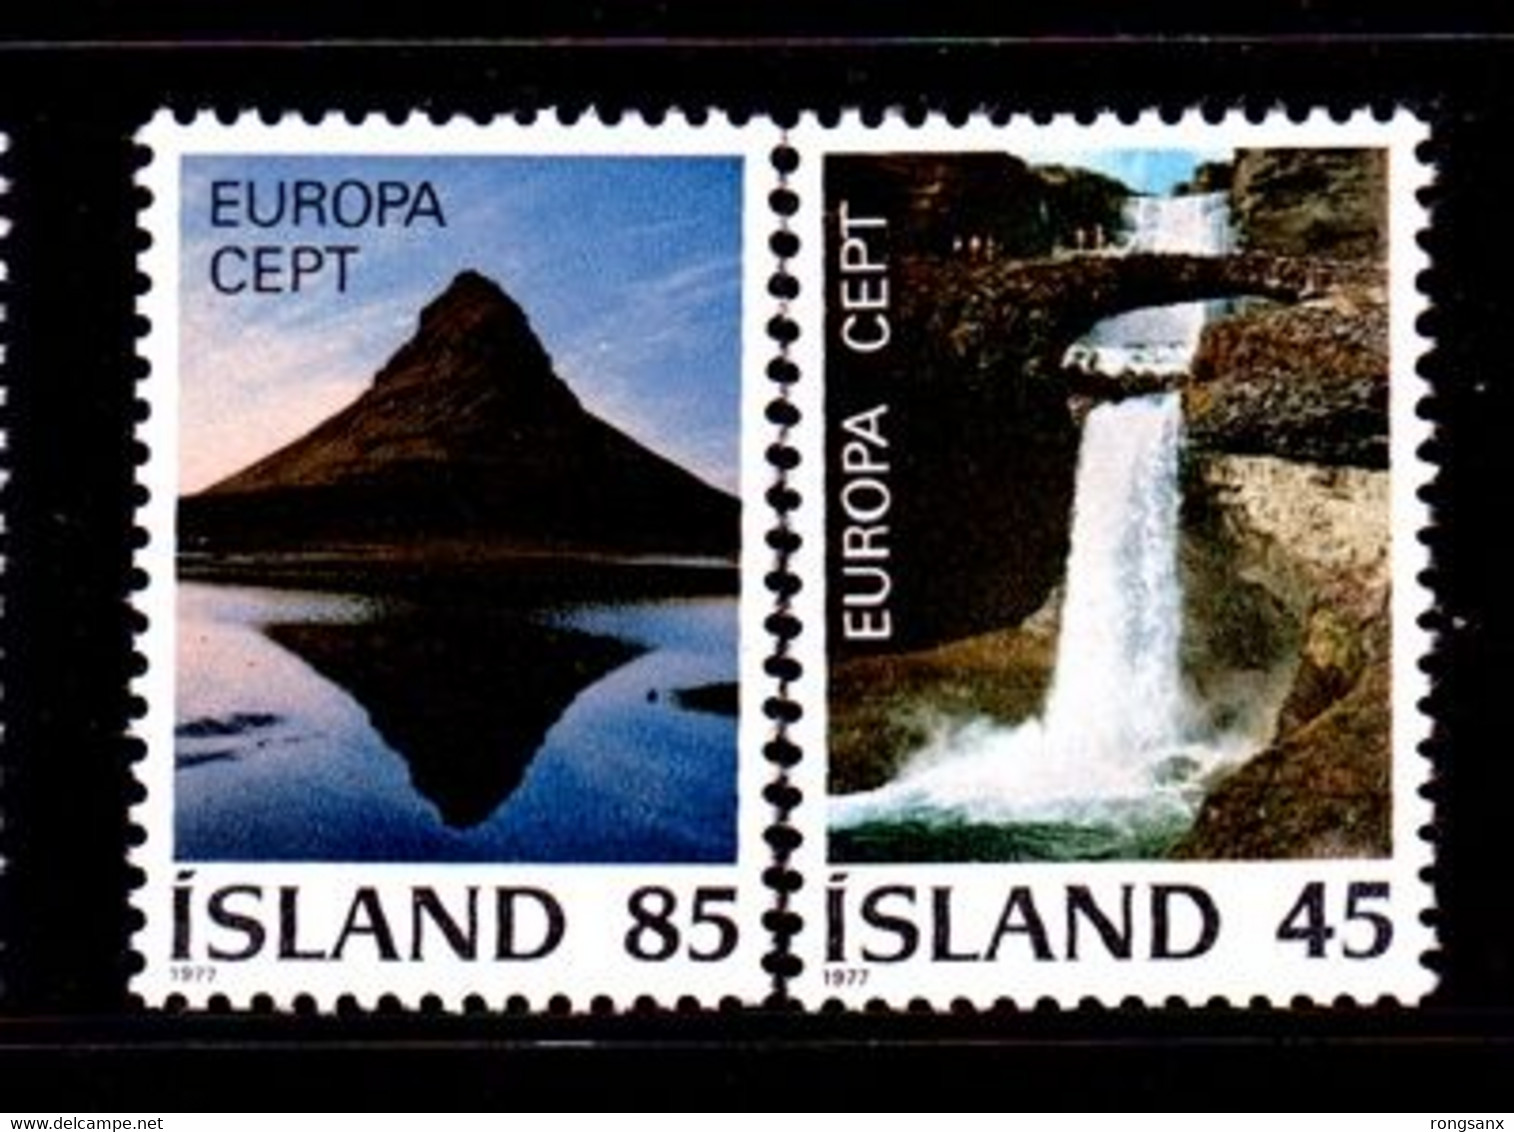 1977 ICELAND EUROPA WATERFALL ISLAND STAMP 2V - Unused Stamps